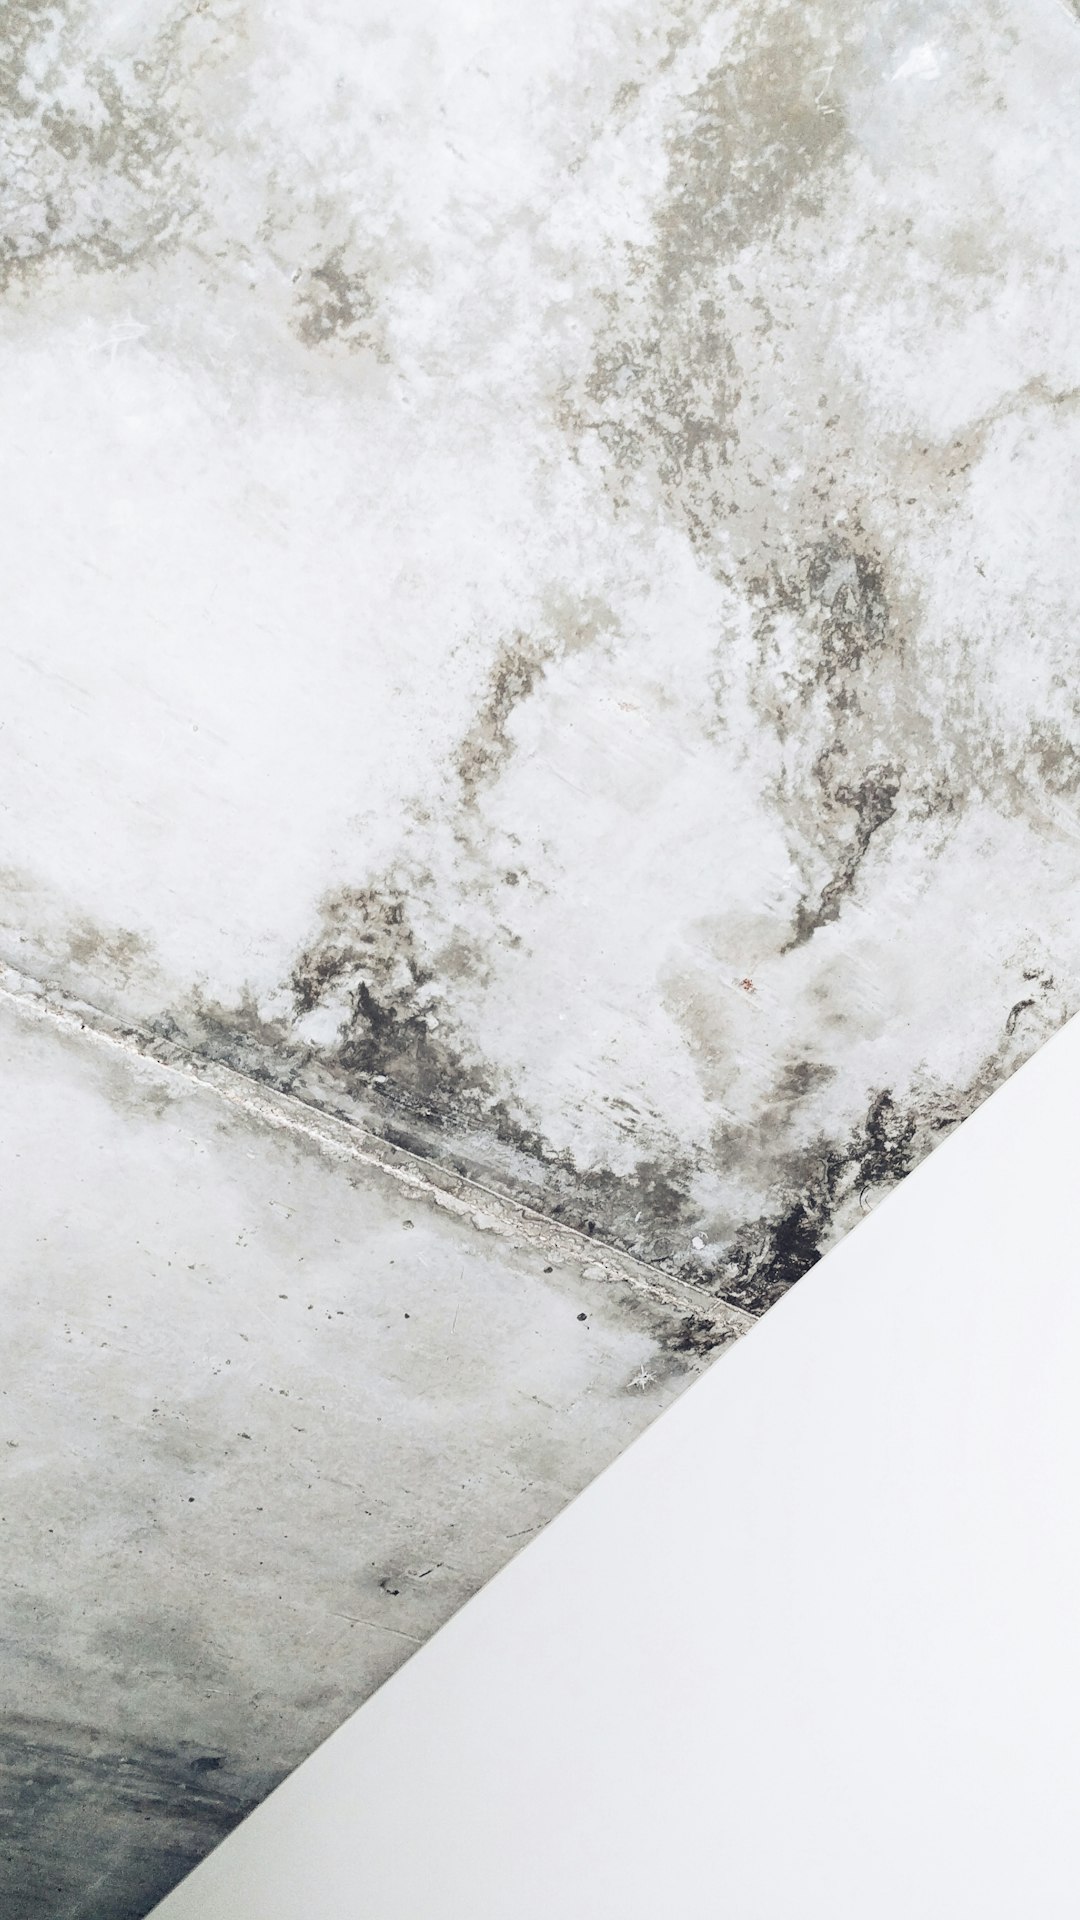 The Ultimate Guide to Locating Top-Rated Basement Black Mold Assessment Companies Near You